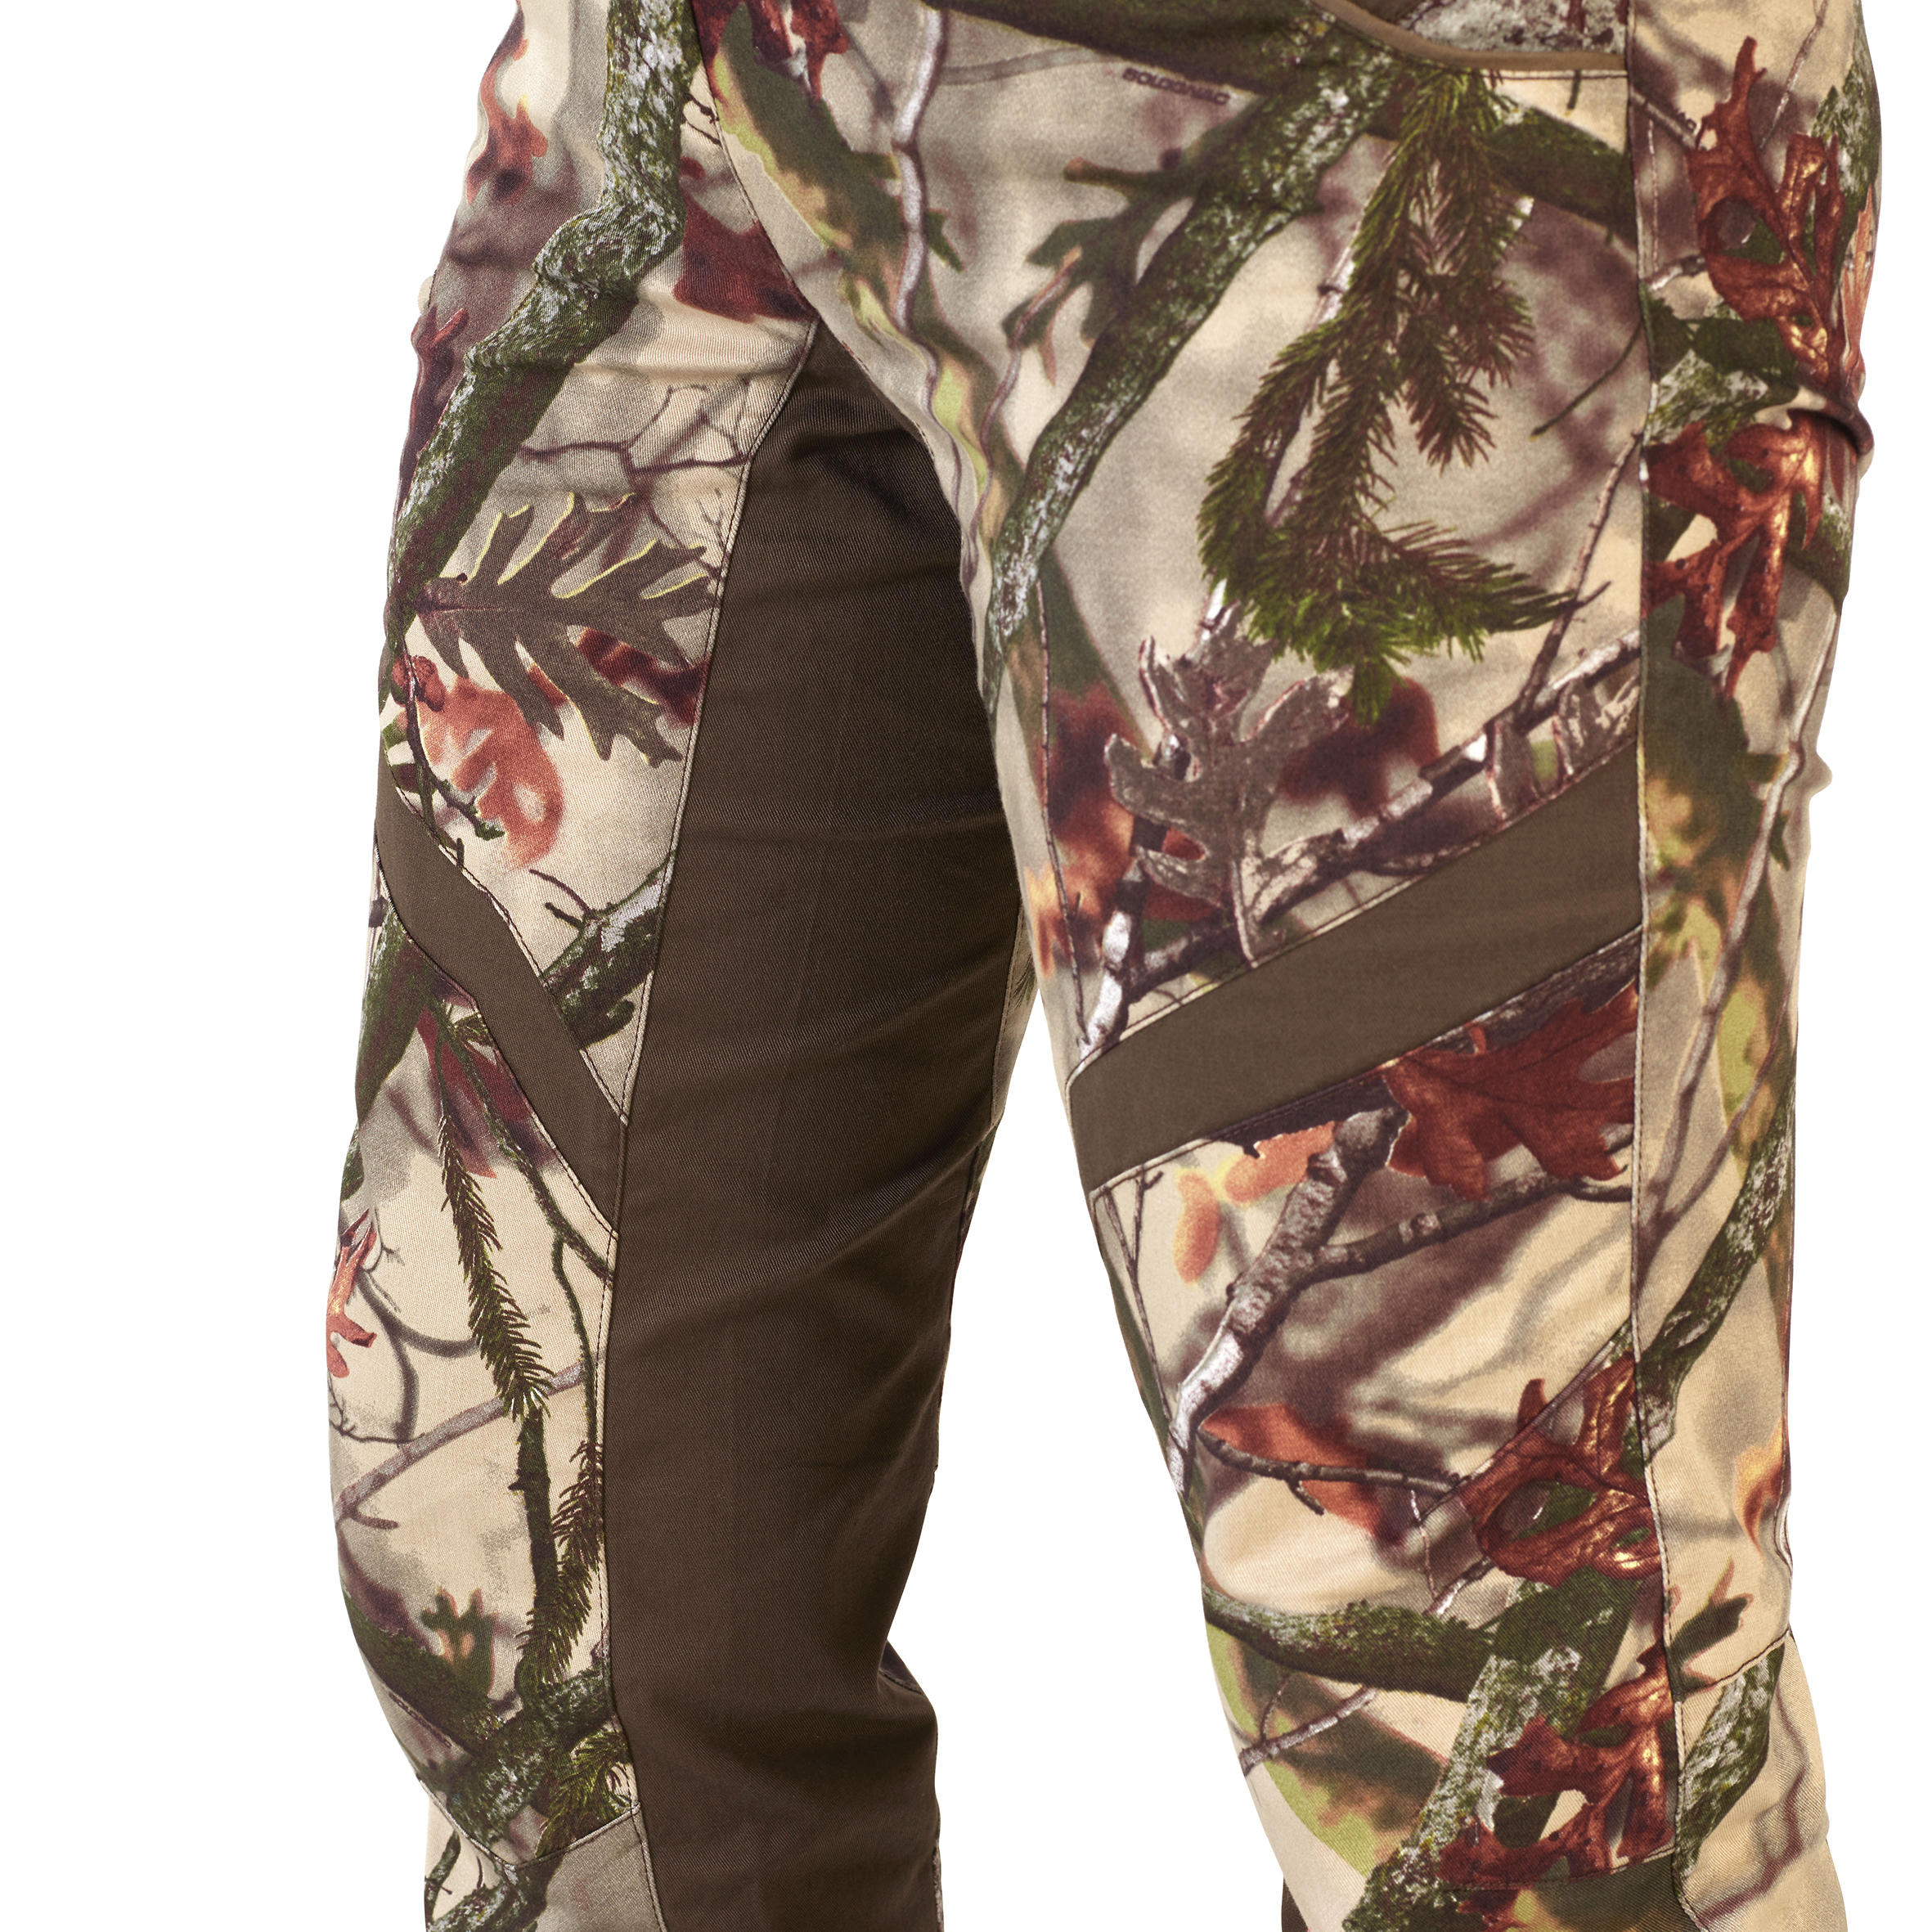 Women's Silent Breathable Trousers - Camo 6/7